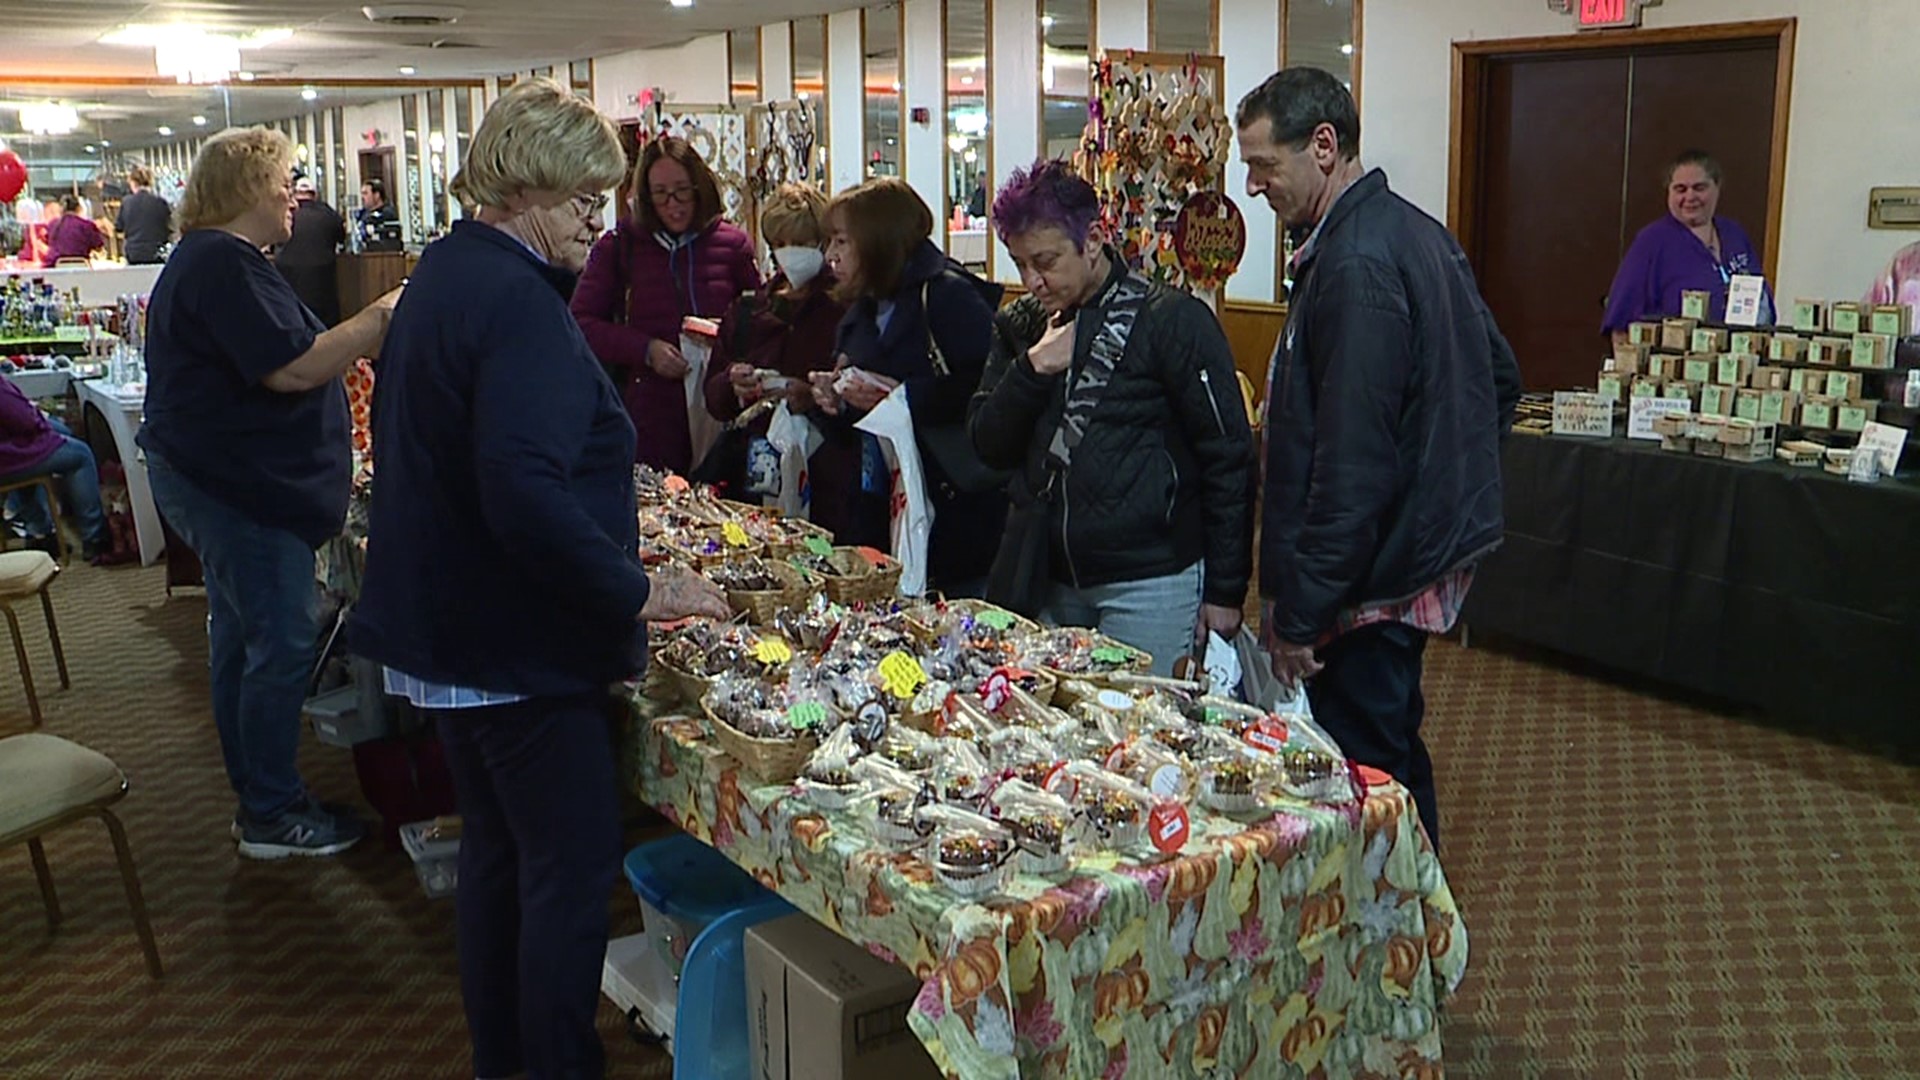 The craft fair was held at the Days Inn in Dickson City Sunday afternoon.